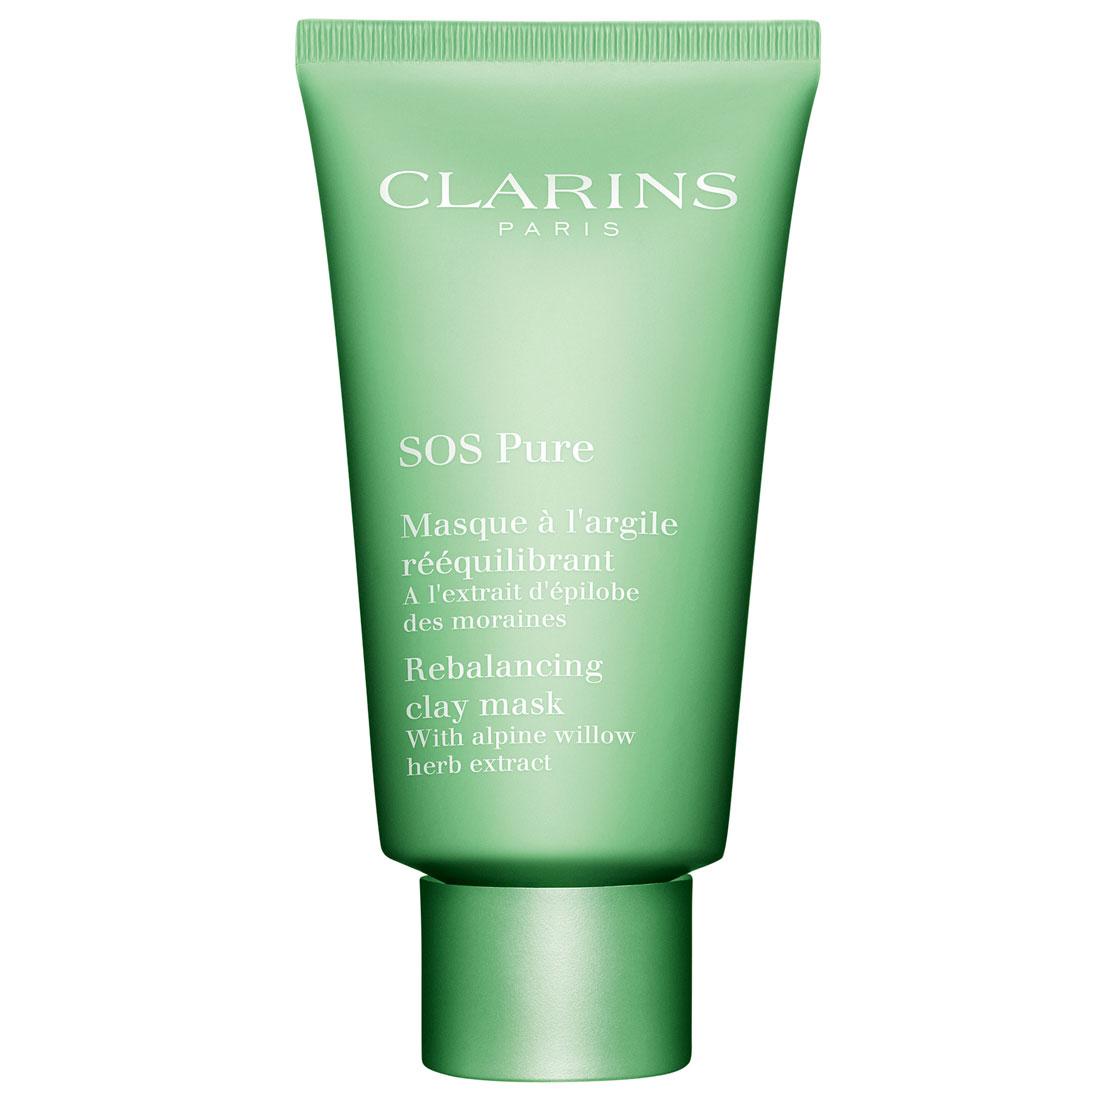 Clarins SOS pure Face Mask